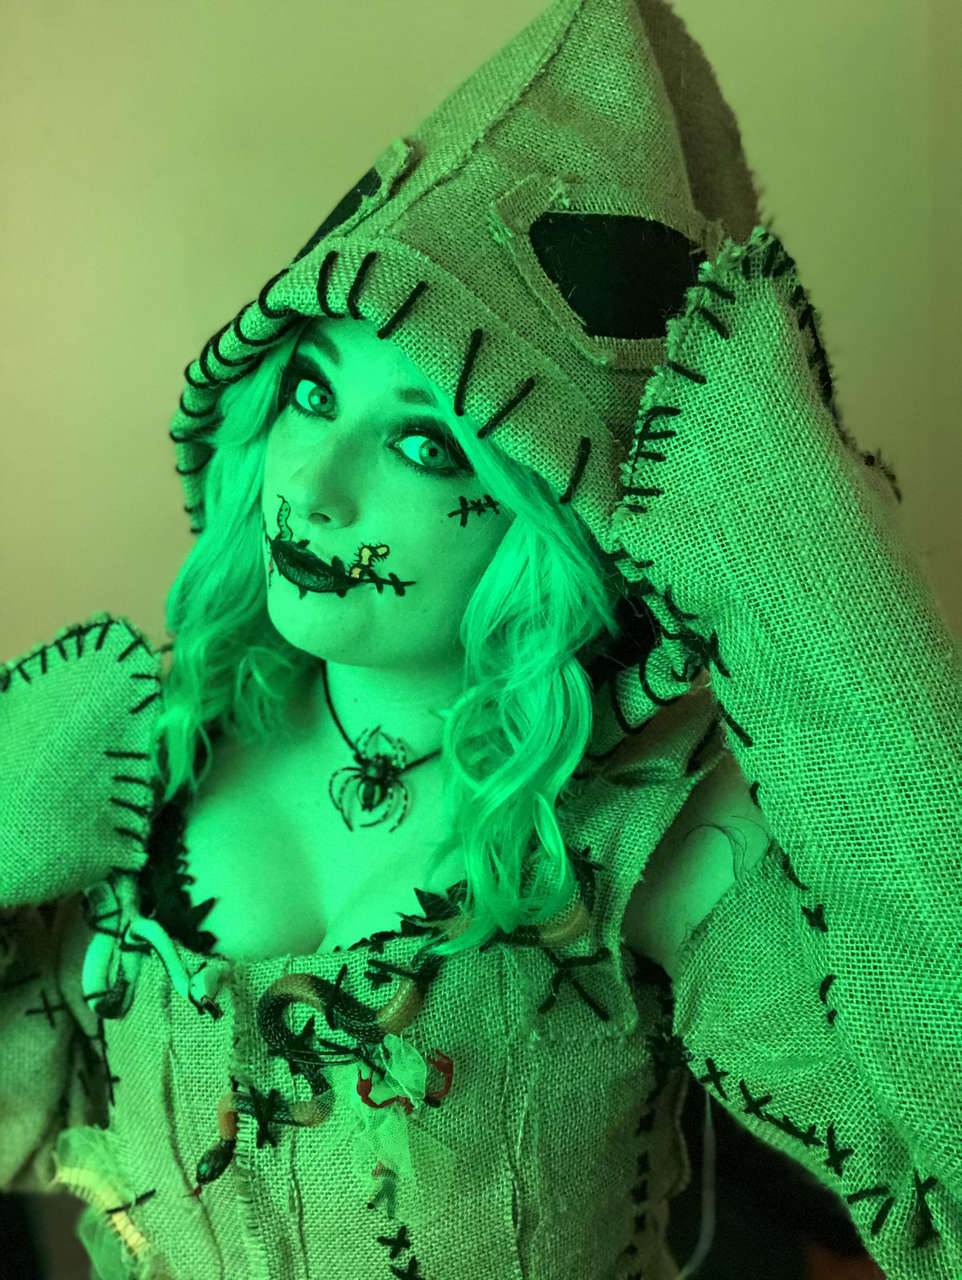 My Oogie Boogie Had A Lot Of Fun Making This One Swipe For More Pics